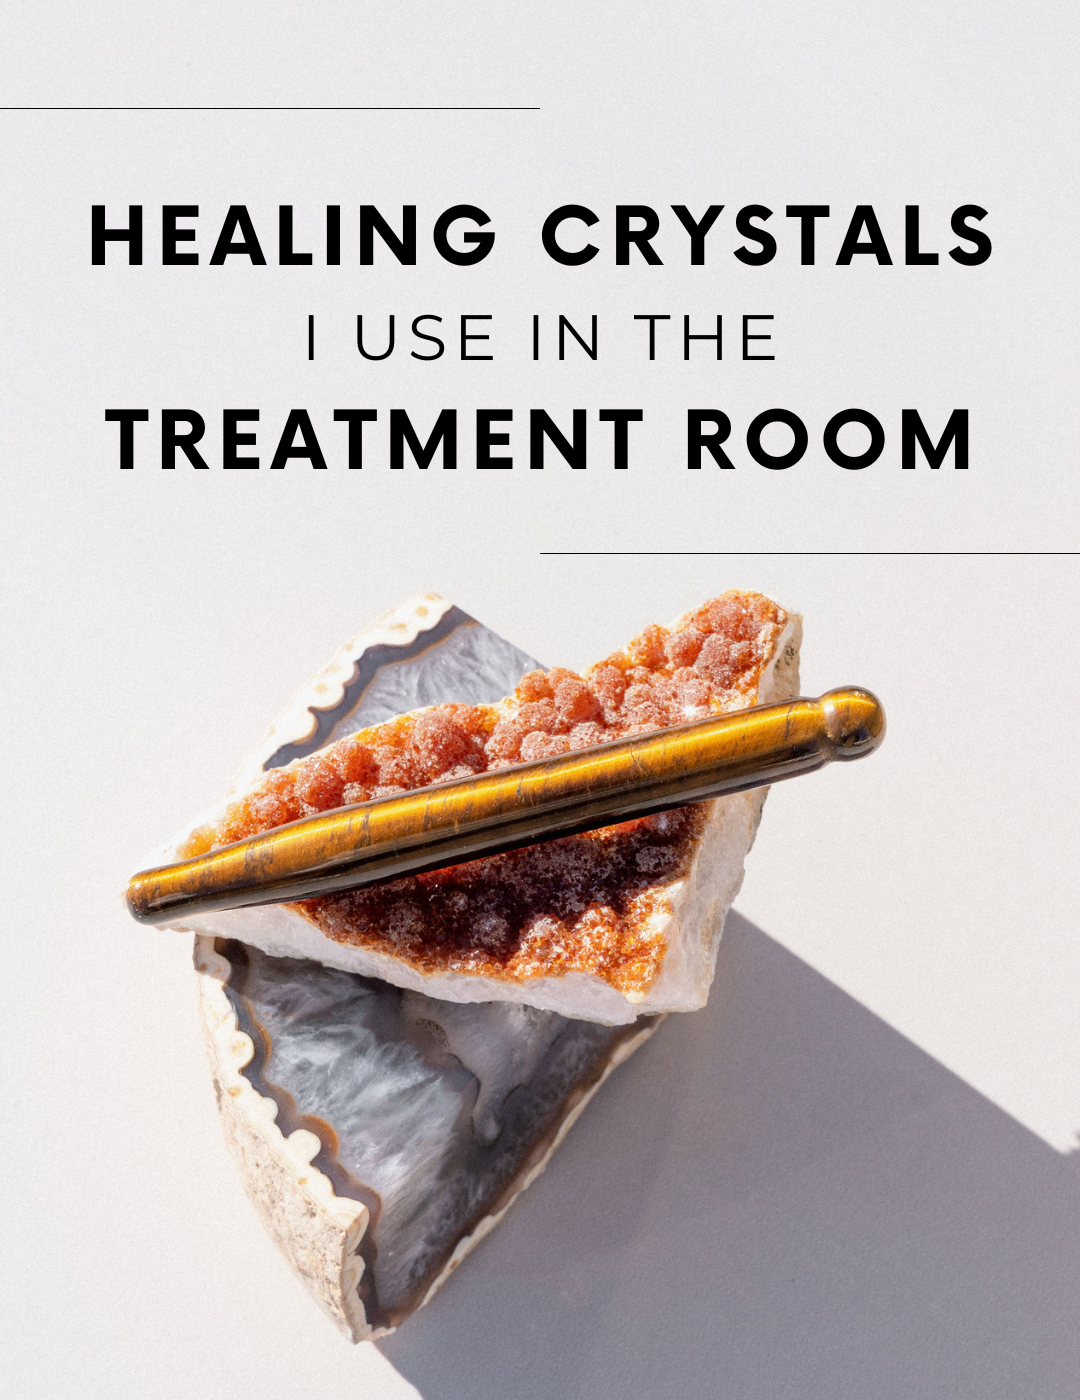 Healing Crystals I Use in the Treatment Room